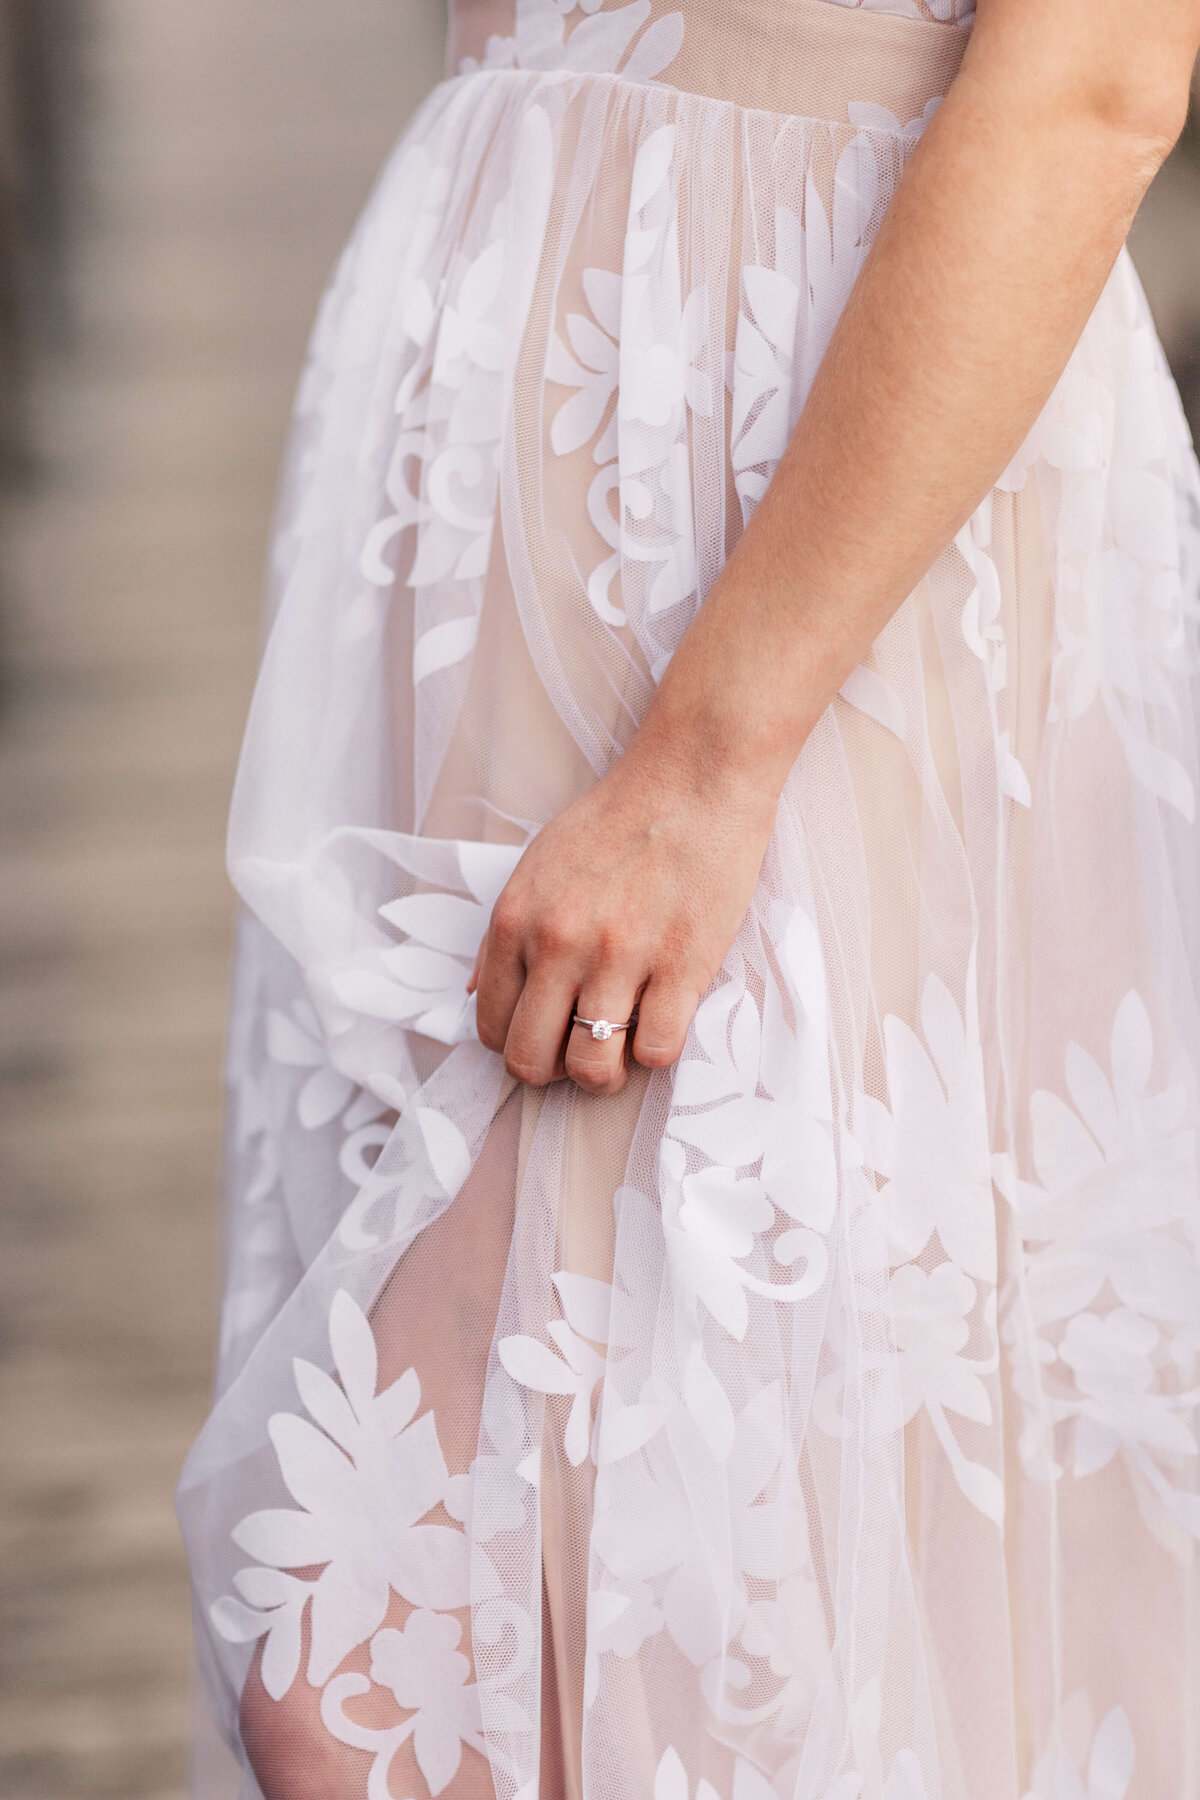 Bride holding her engagement ring against her dress.